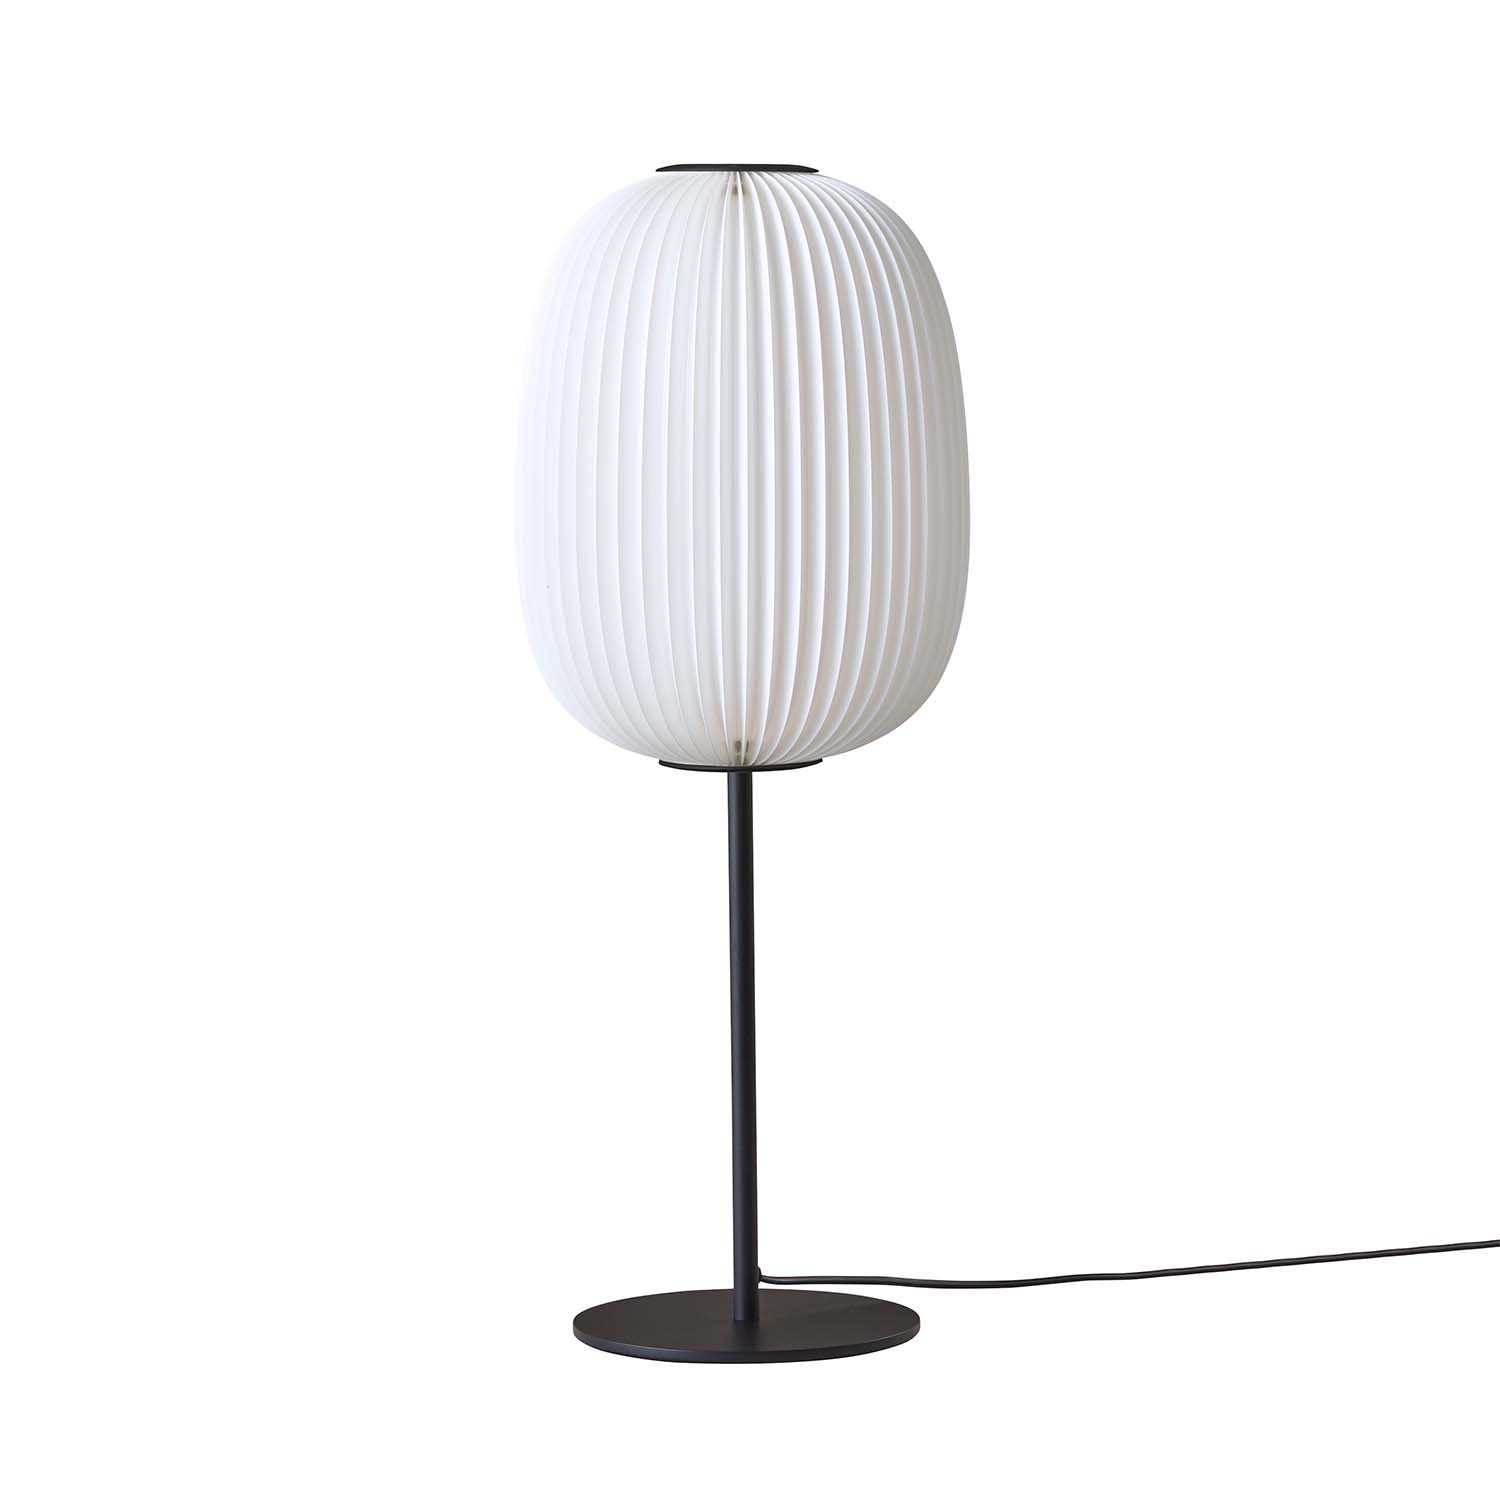 LAMELLA - Table lamp made by hand in pleated paper